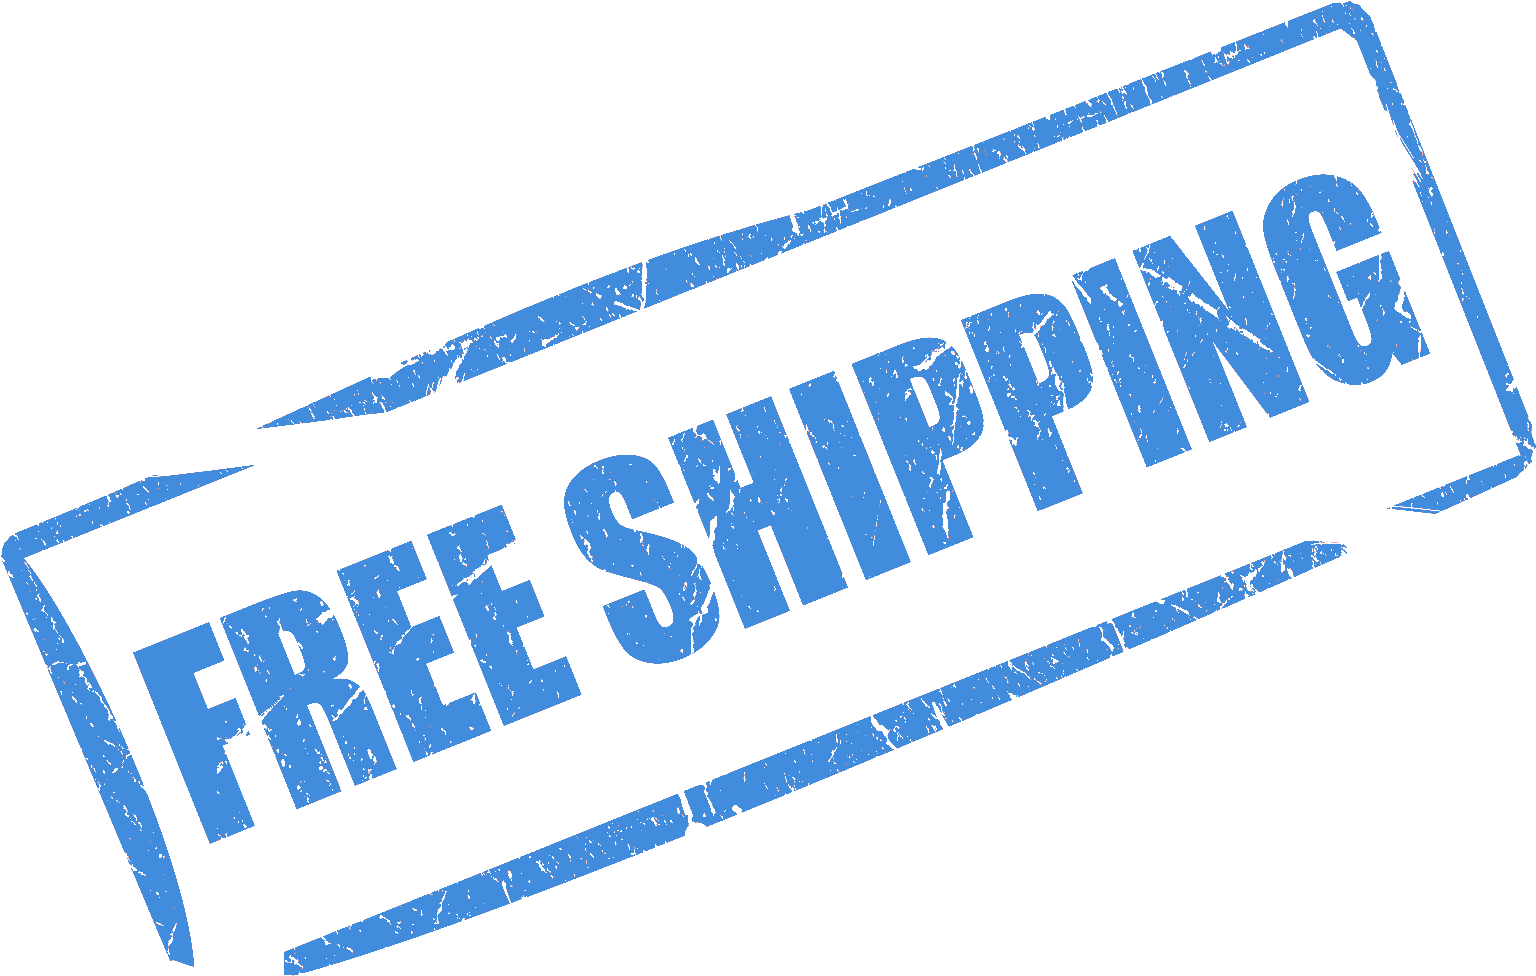 Free-shipping - National Free Shipping Day 2017 (1600x1075), Png Download